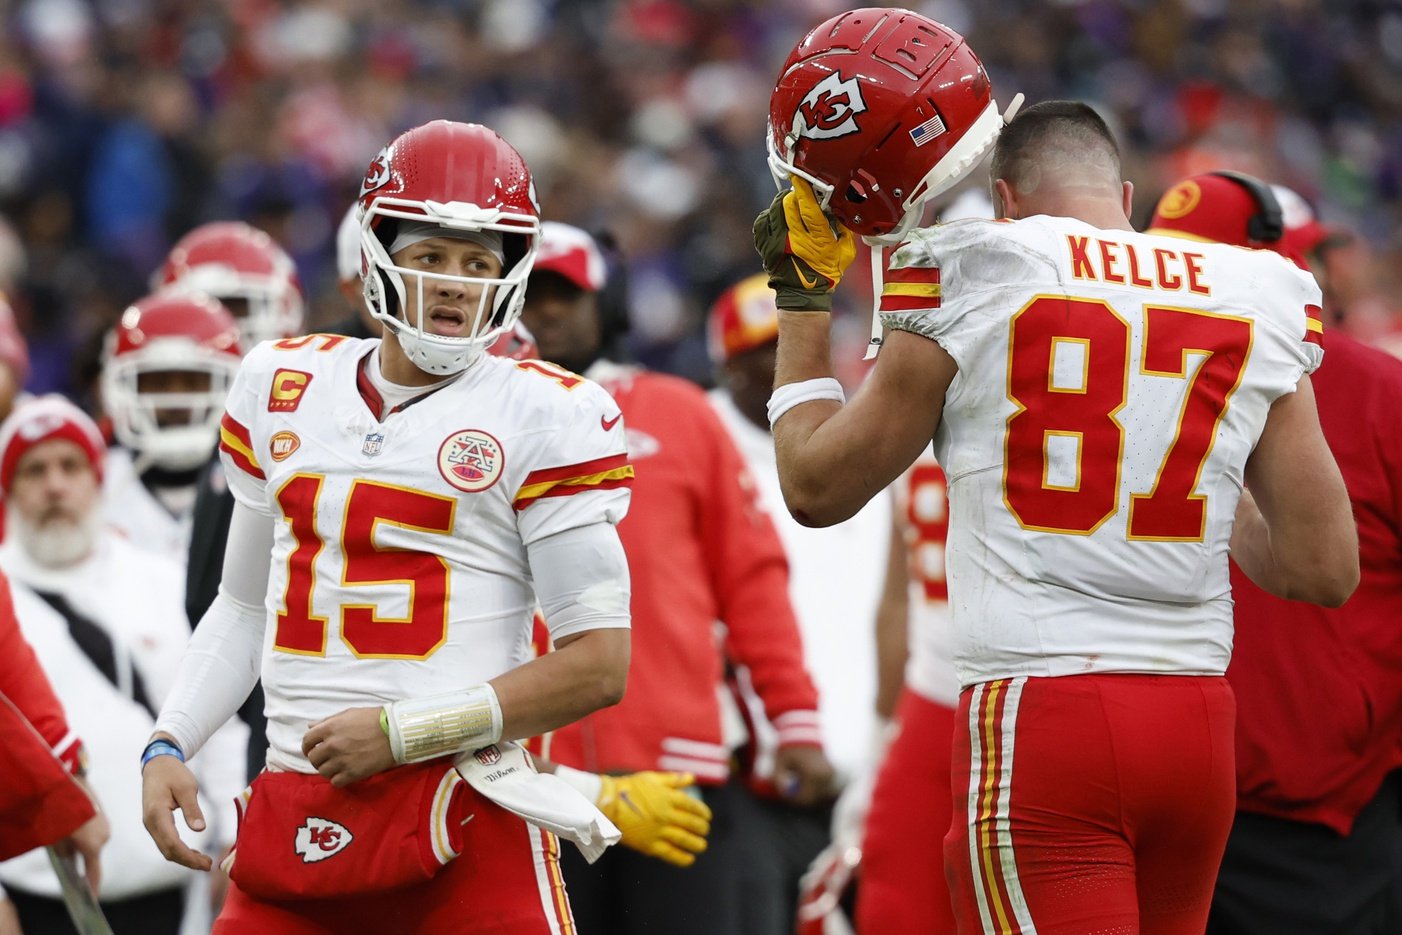 Kansas City Chiefs quarterback Patrick Mahomes (15) celebrates with Chiefs tight end Travis Kelce (87) after a touchdown against the Baltimore Ravens in the AFC Championship football game at M&T Bank Stadium.